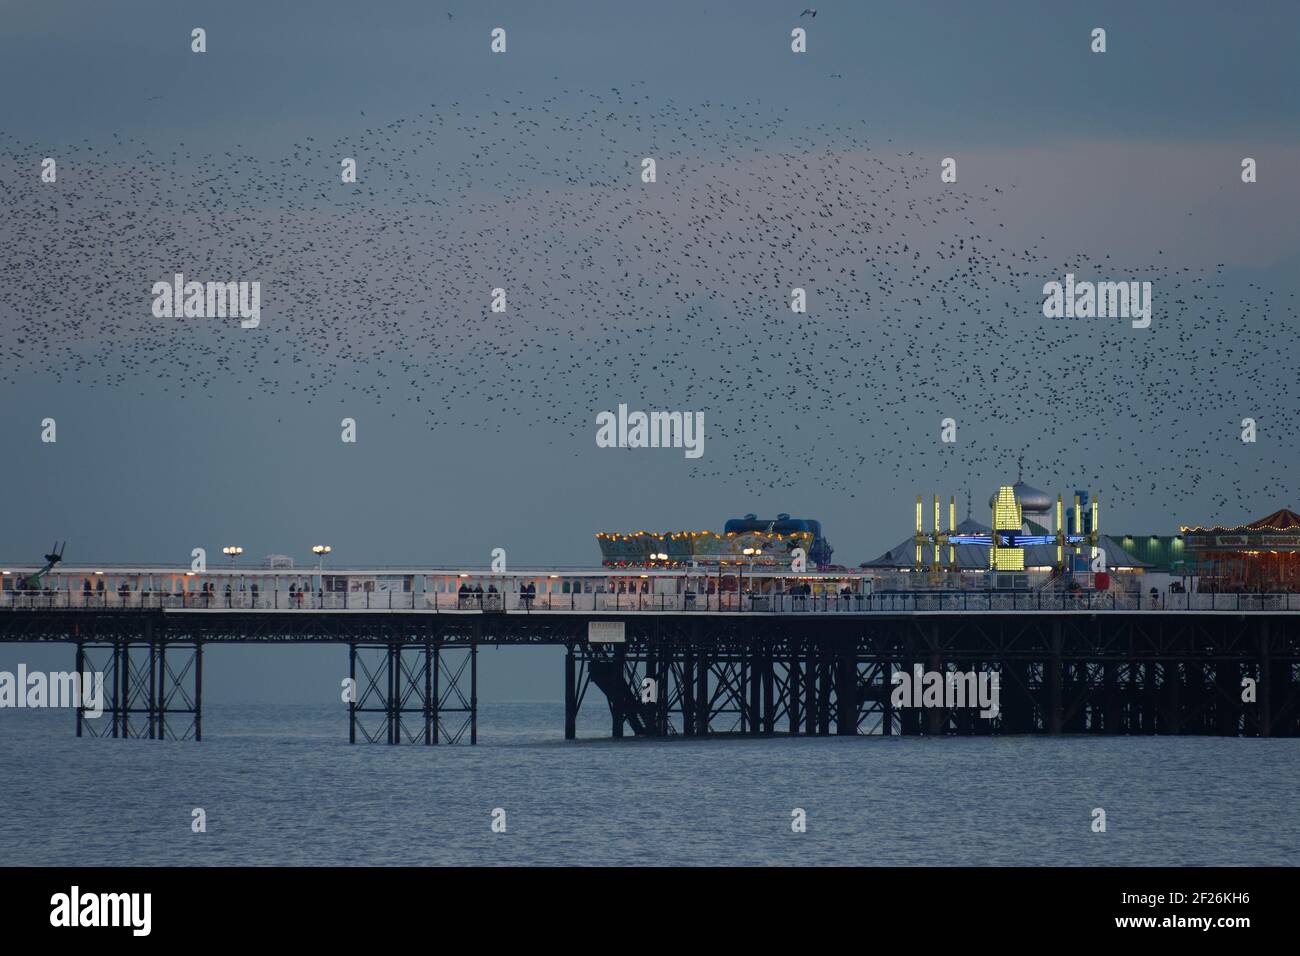 BRIGHTON, EAST SUSSEX/UK - JANUARY 26 : Starlings over the Pier in Brighton East Sussex on January 26, 2018 Stock Photo